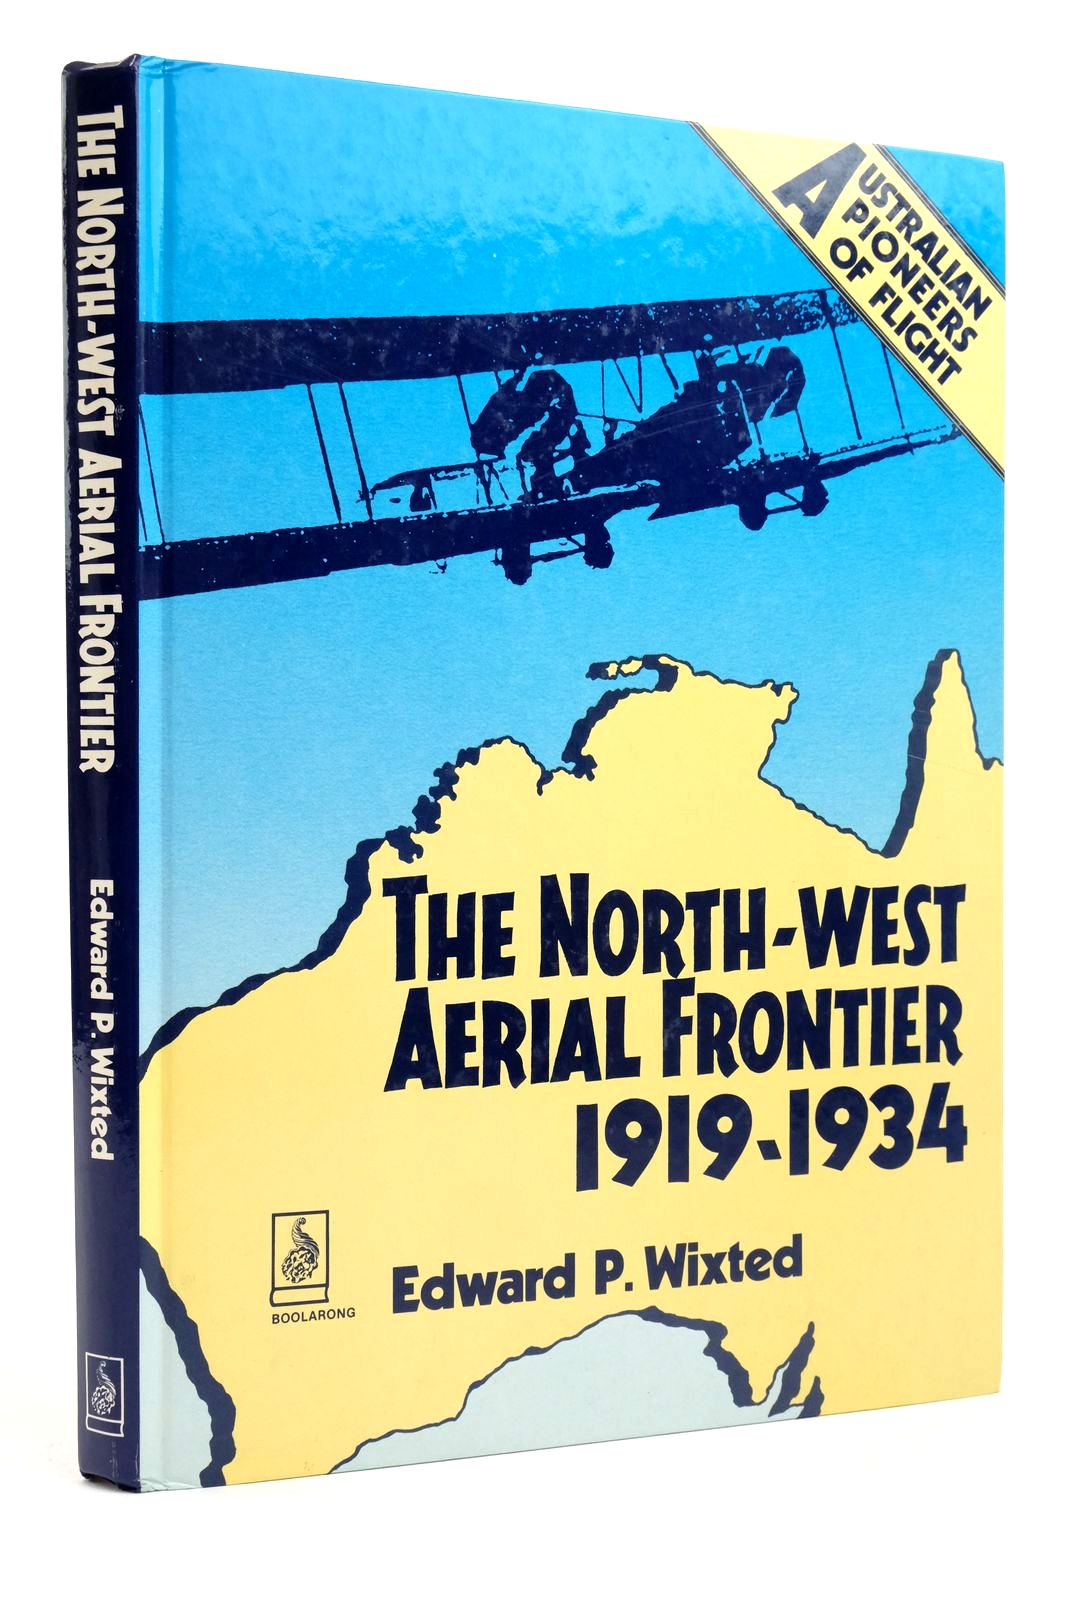 Photo of THE NORTH-WEST AERIAL FRONTIER 1919-1934 written by Wixted, Edward P. Taylor, Joy published by Boolarong Publications (STOCK CODE: 2138652)  for sale by Stella & Rose's Books